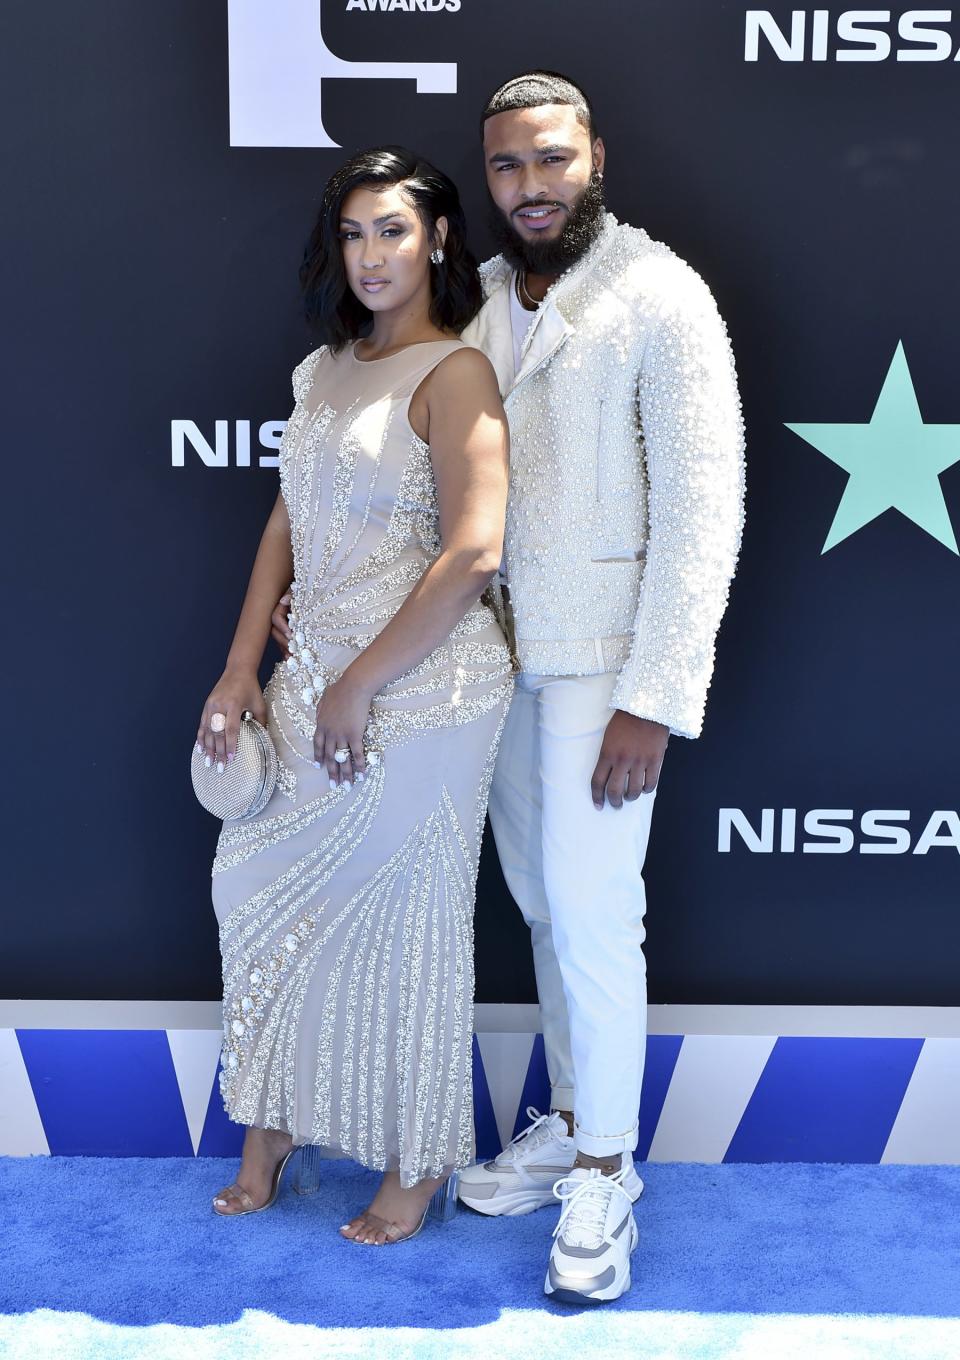 Queen Naija and Clarence White